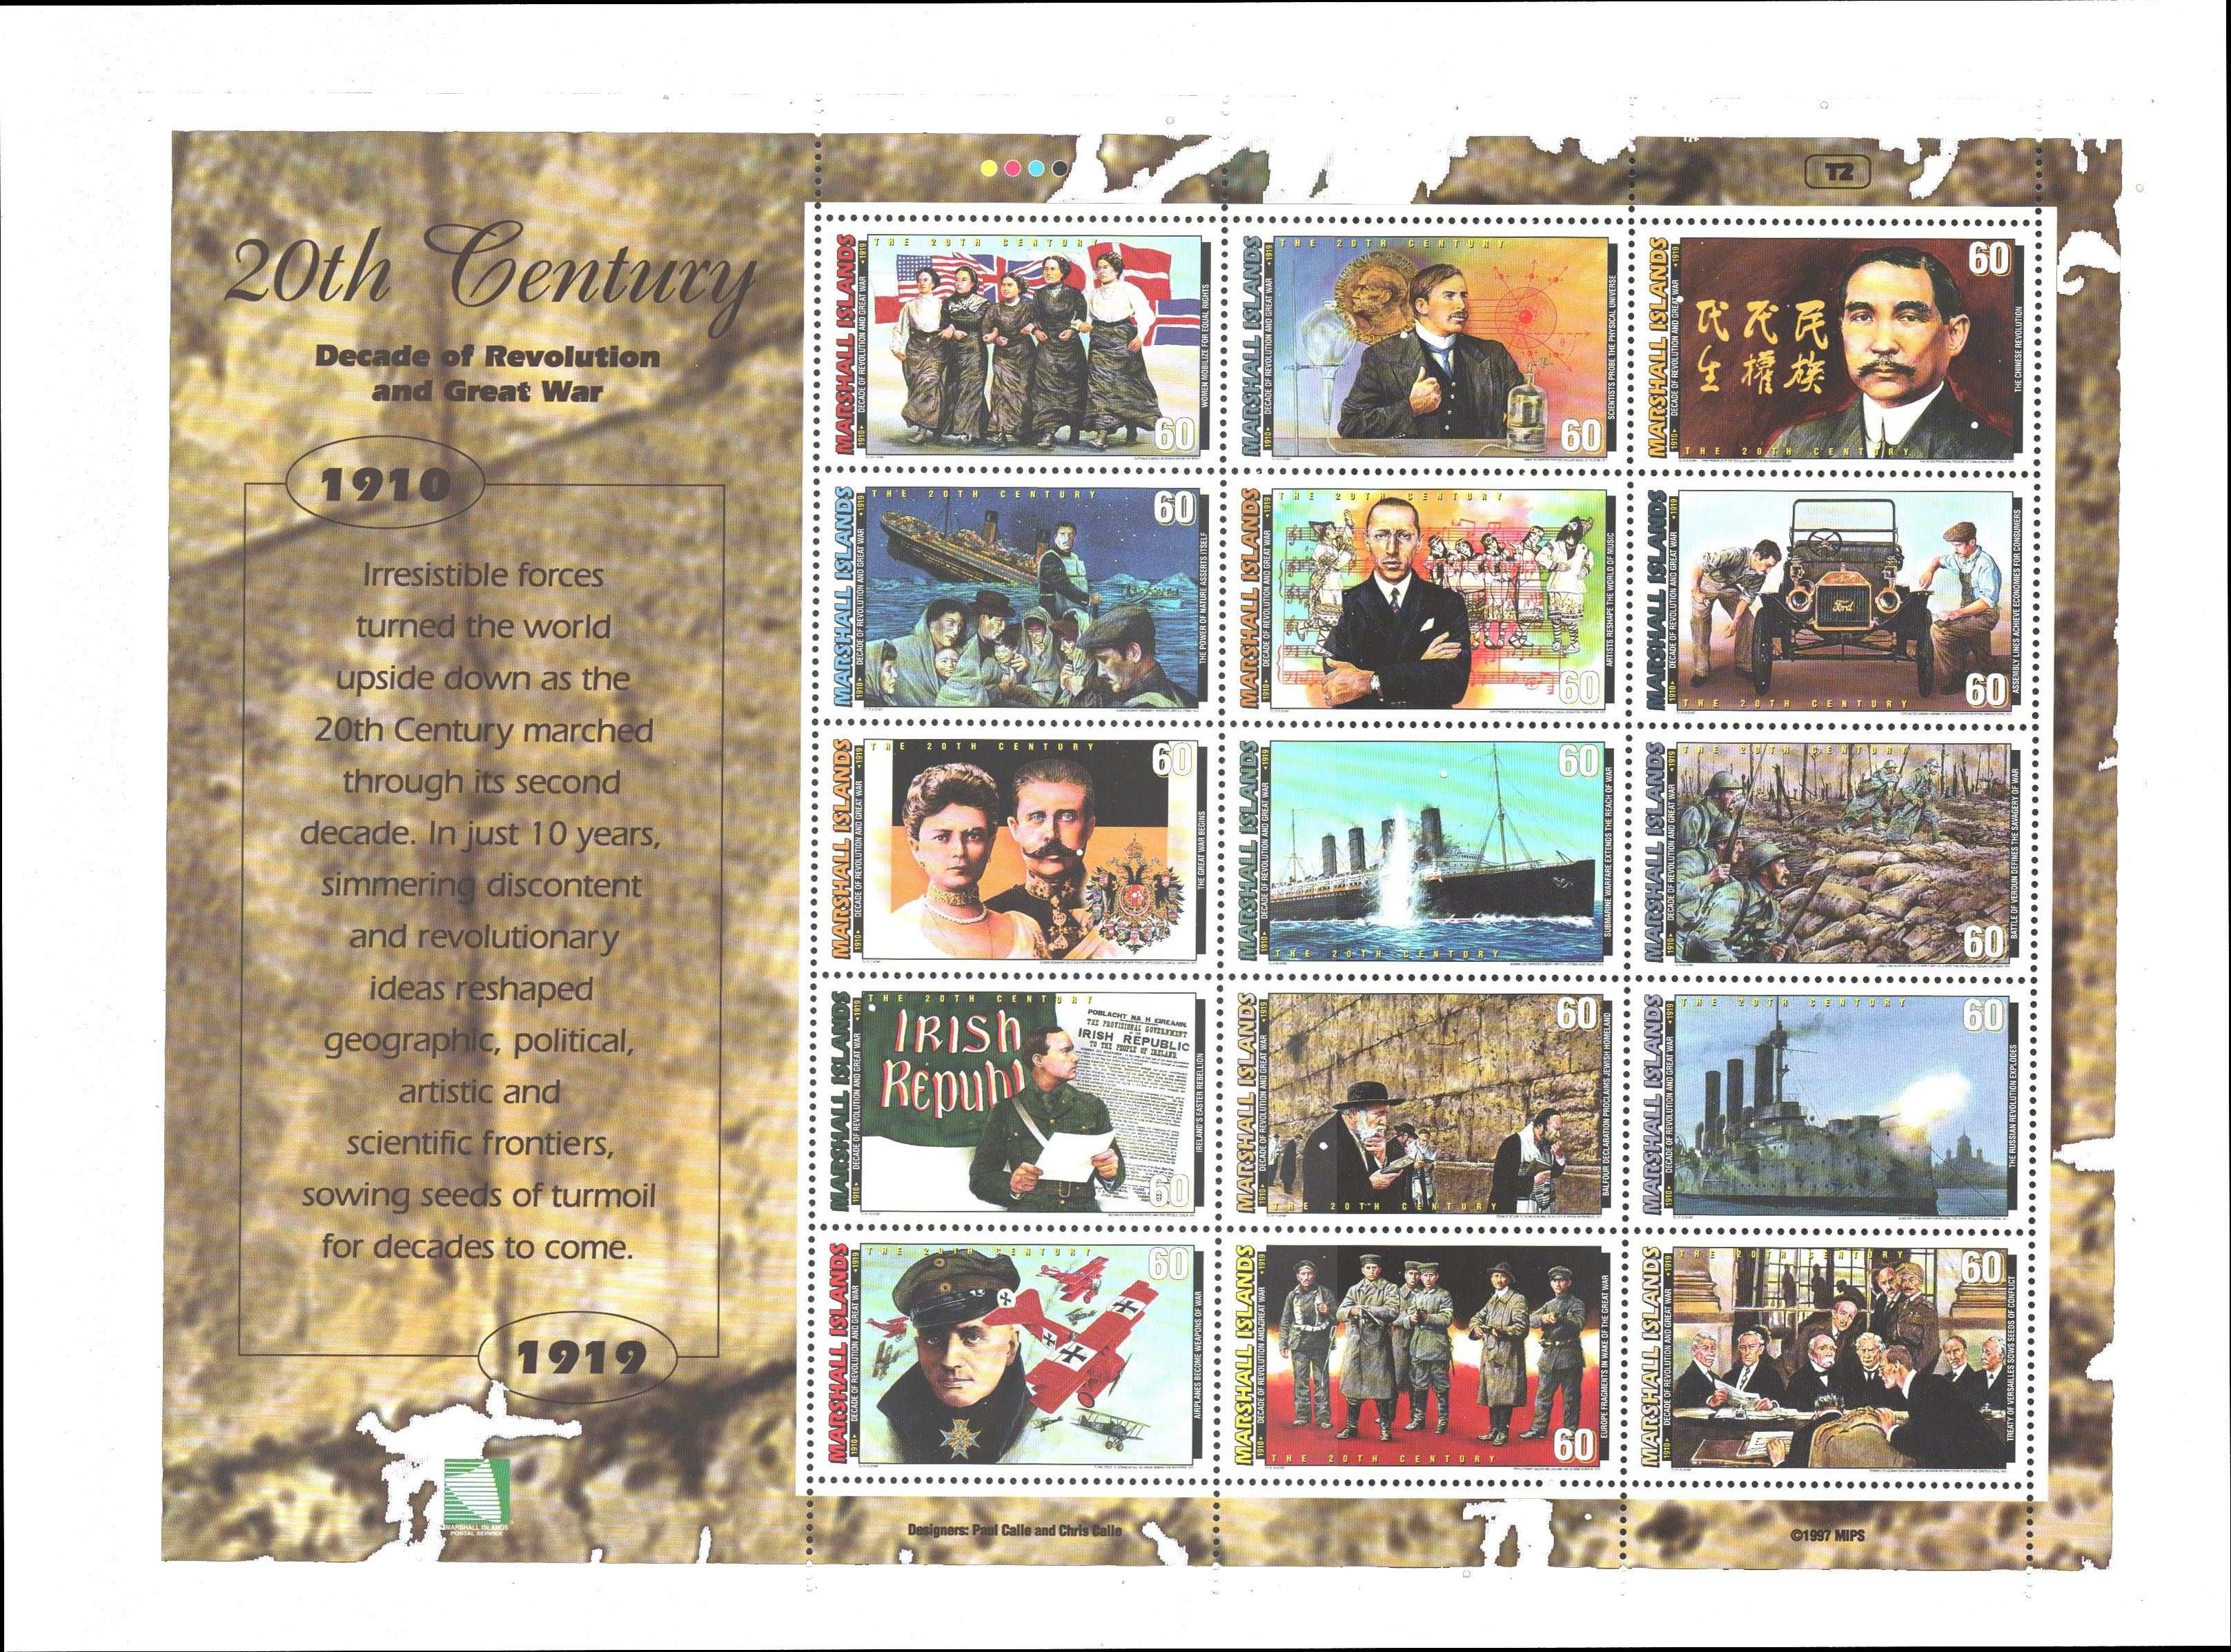 1997 Marshall Islands stamp sheet honoring the decade 1910-19